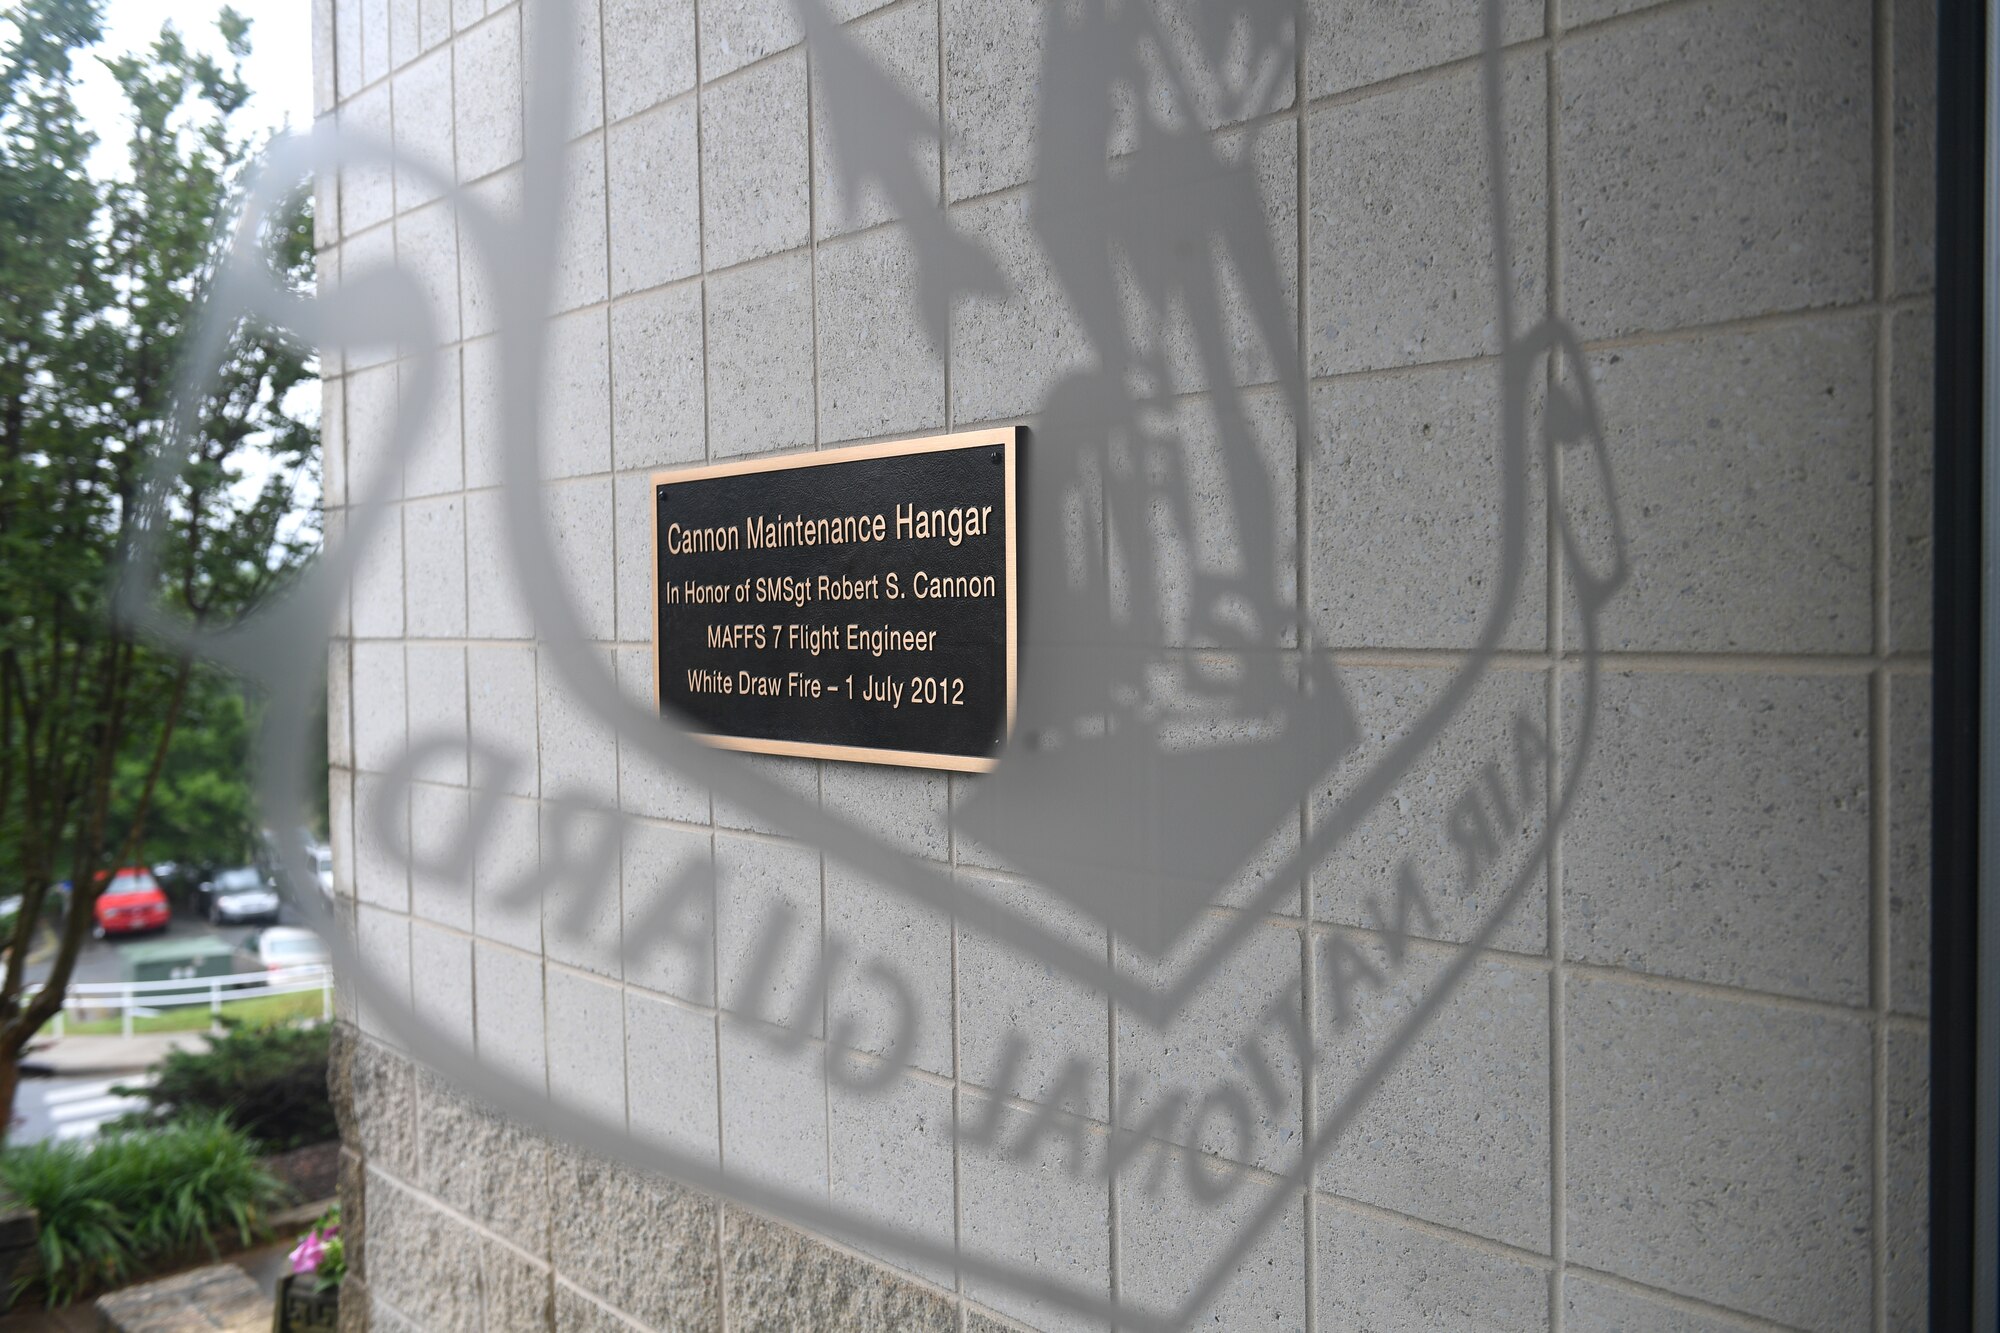 A plaque is displayed dedicating the 145th Maintenance Group hangar to U.S. Air Force Senior Master Sgt. Robert S. Cannon, a Modular Airborne Fire Fighting System (MAFFS) seven crew member, at the North Carolina Air National Guard Base, Charlotte Douglas International Airport, June 9, 2019. U.S. Air Force Lt. Col. Paul K. Mikeal, Maj. Joseph M. McCormick, Maj. Ryan S. David, and Senior Master Sgt. Robert S. Cannon tragically lost their lives seven years ago in the MAFFS seven accident while fighting fires in South Dakota. These Airmen were part of the MAFFS seven crew and are remembered with building dedication ceremonies to honor their legacy for years to come.